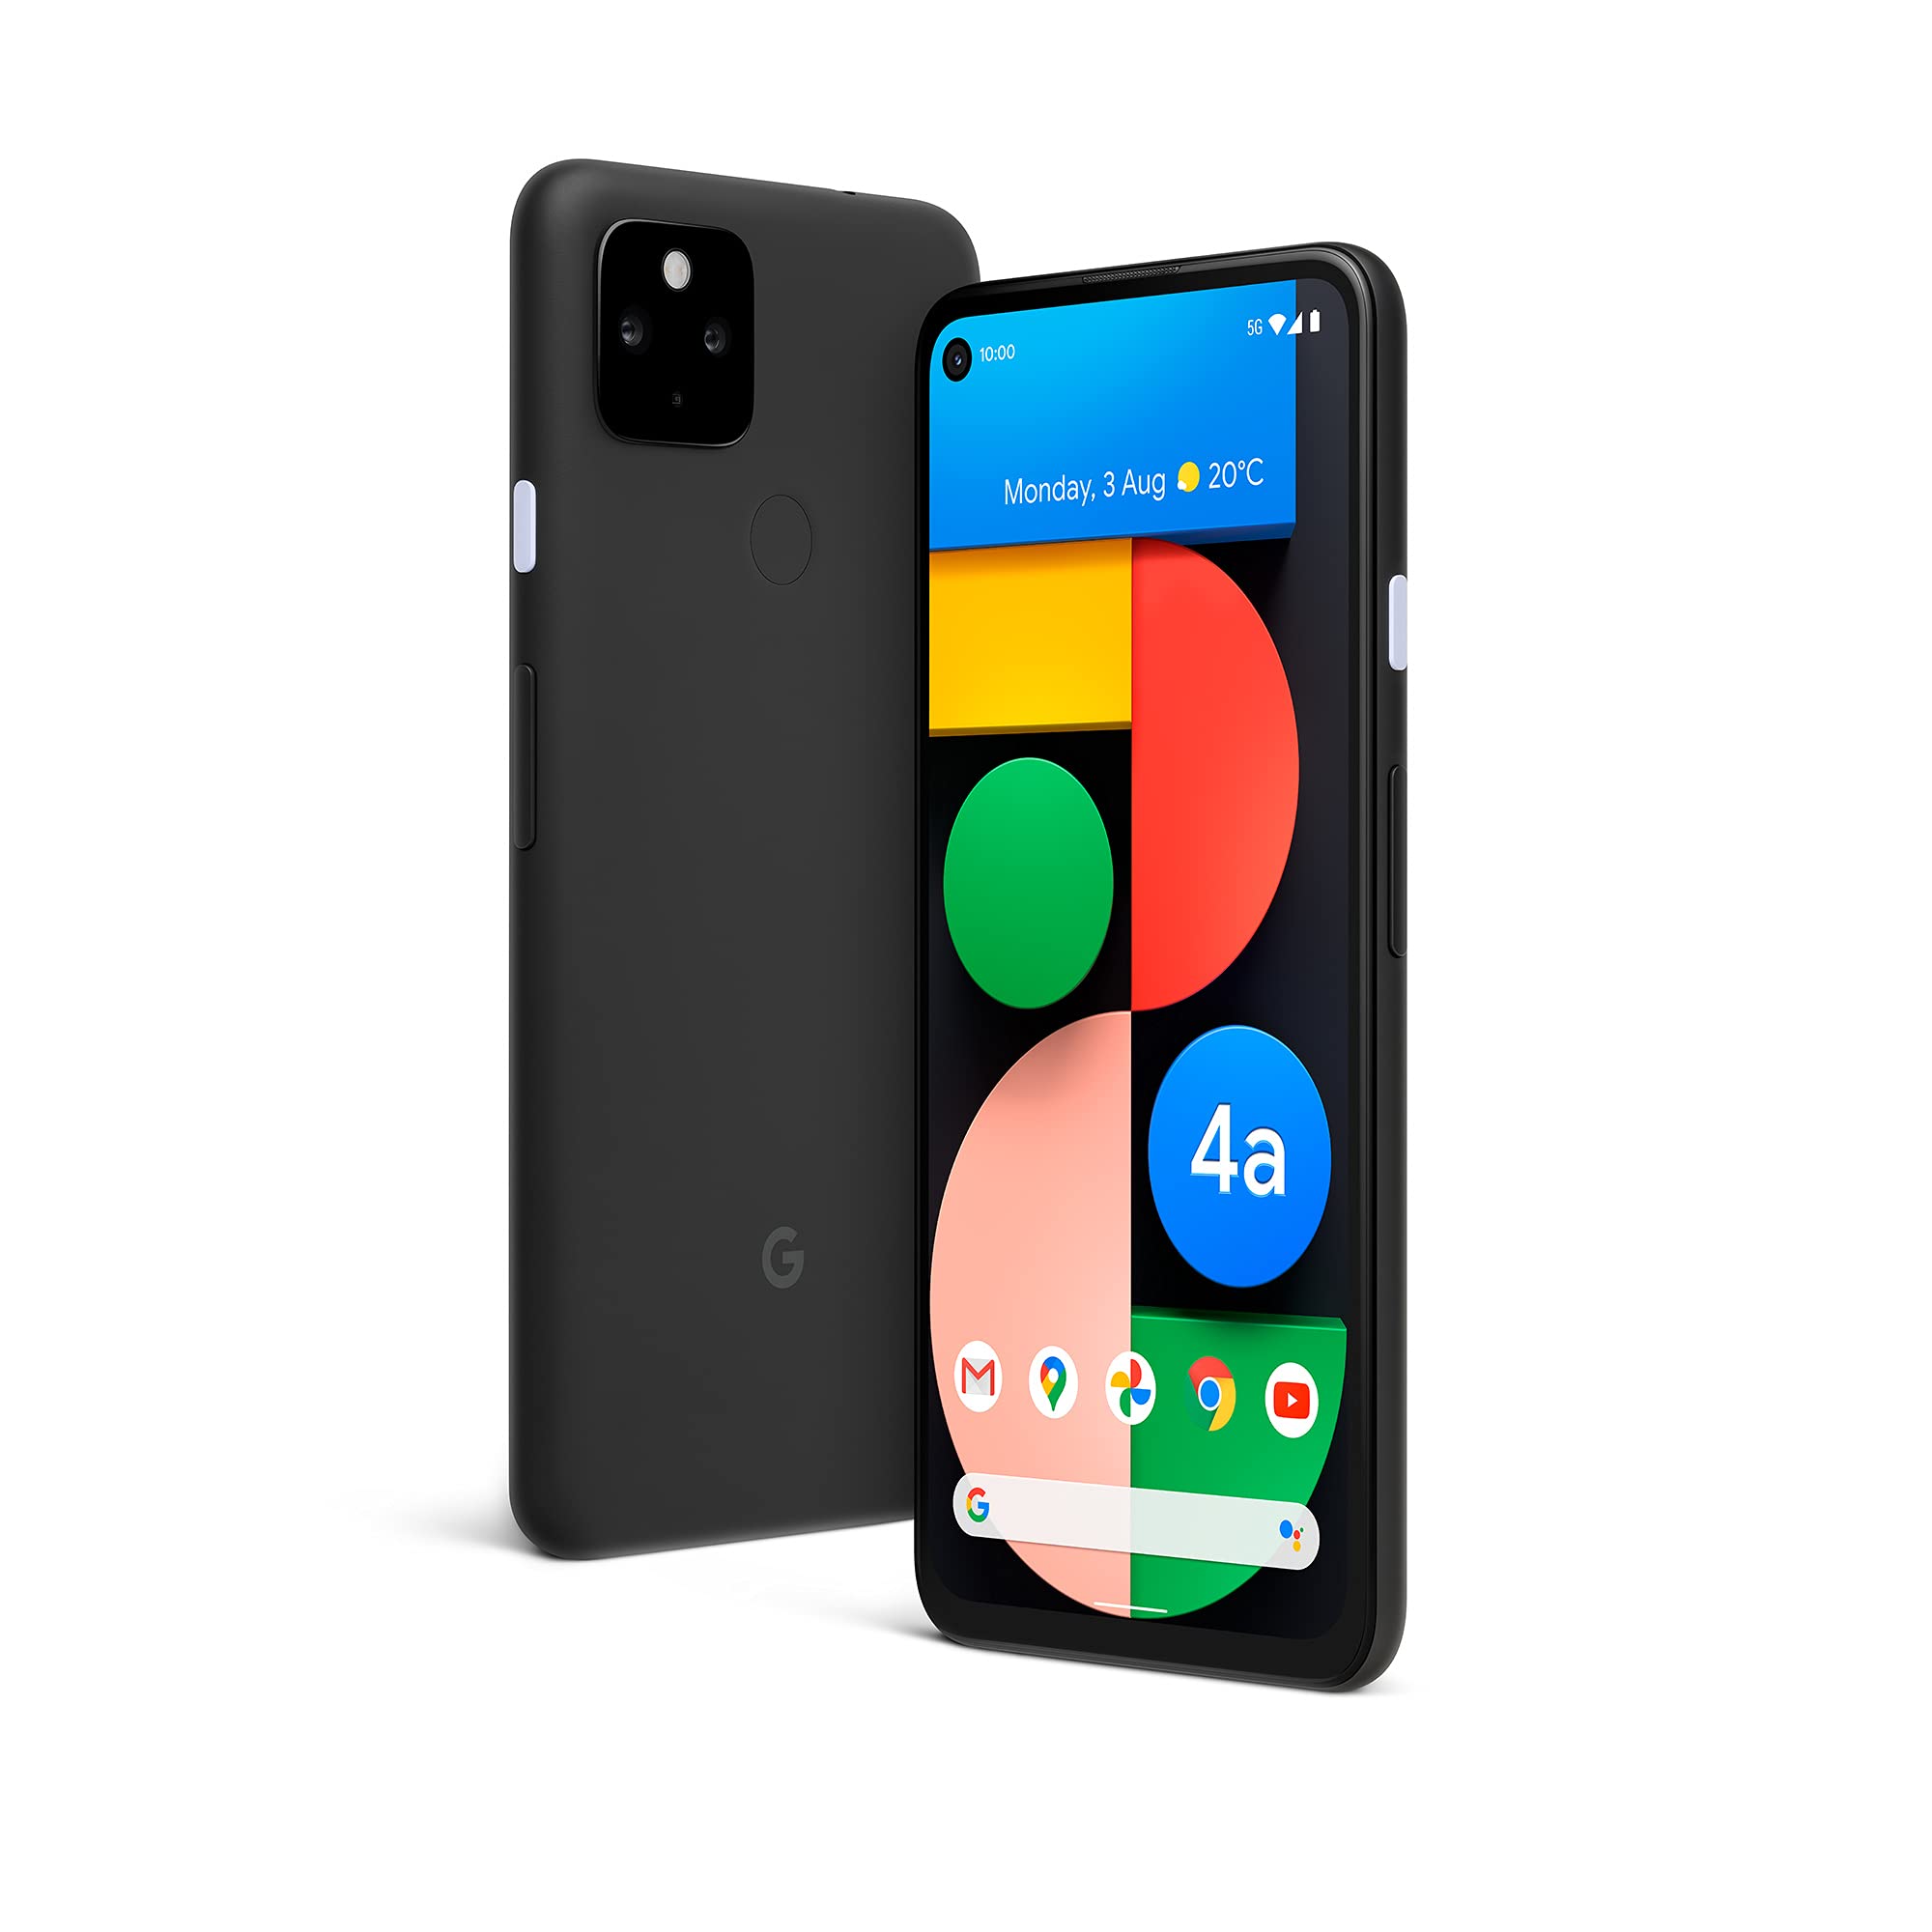 Activating Gesture Controls On Google Pixel 4: A User’s Guide